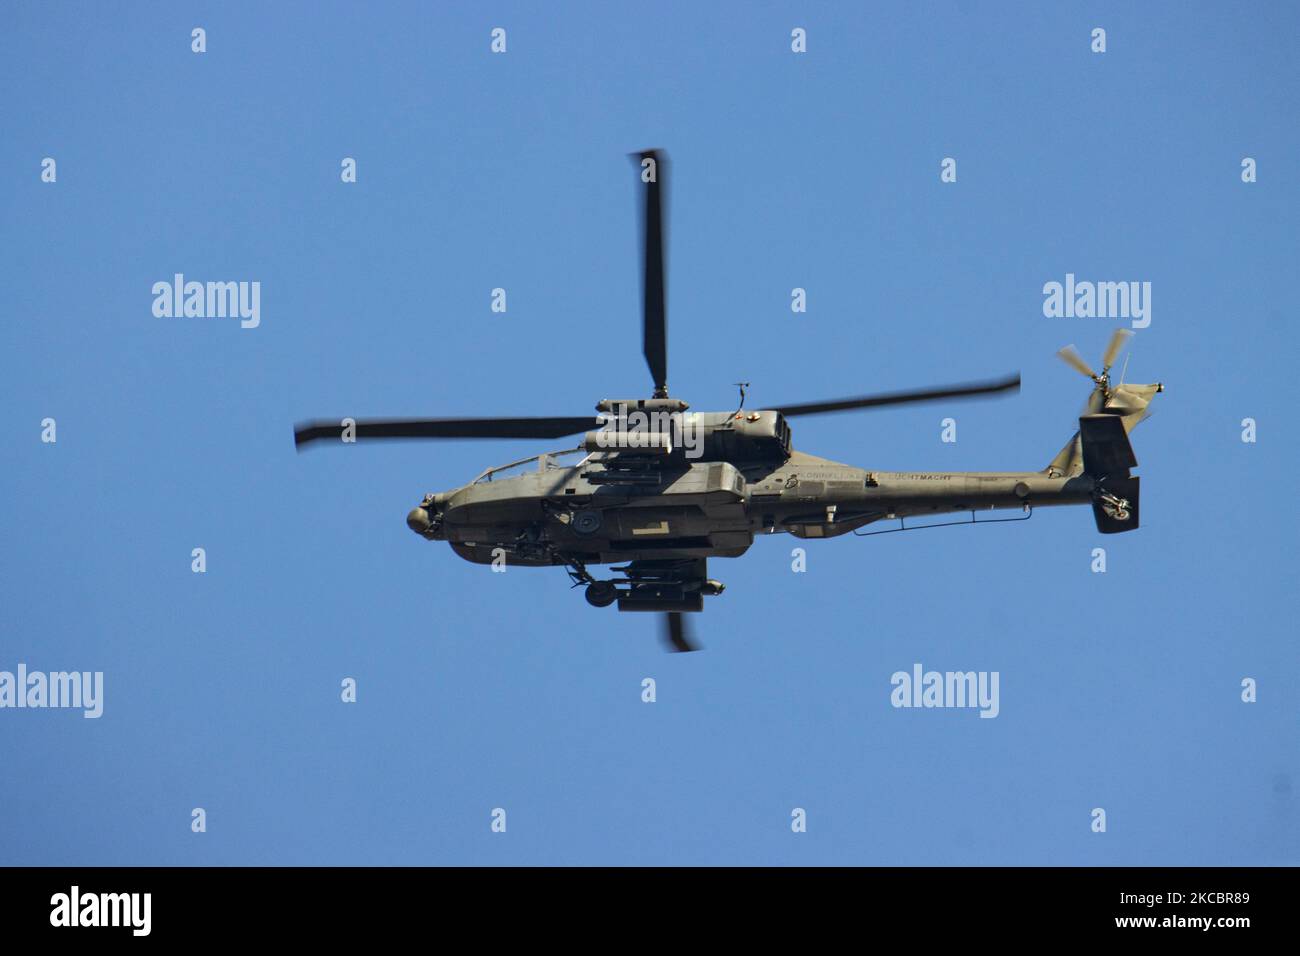 Royal Netherlands Air Force RNLAF or Koninklijke Luchtmacht in Dutch, AH-64 Apache attacking helicopter of the Army, as seen flying in the blue sky, during an exercise mission near the airport of Eindhoven. The American Made iconic Apache helicopter AH-64 is a military attack helicopter carrying multiple sensors and weapon systems like Hellfire missiles, Hydra rockets with night vision capability. The U.S. Army is the primary operator but also Greece, Japan, Isreal, Netherlands, Singapore and United Arab Emirates, while the helicopter served in conflict areas or war in Panama, Kosovo, Afghanis Stock Photo